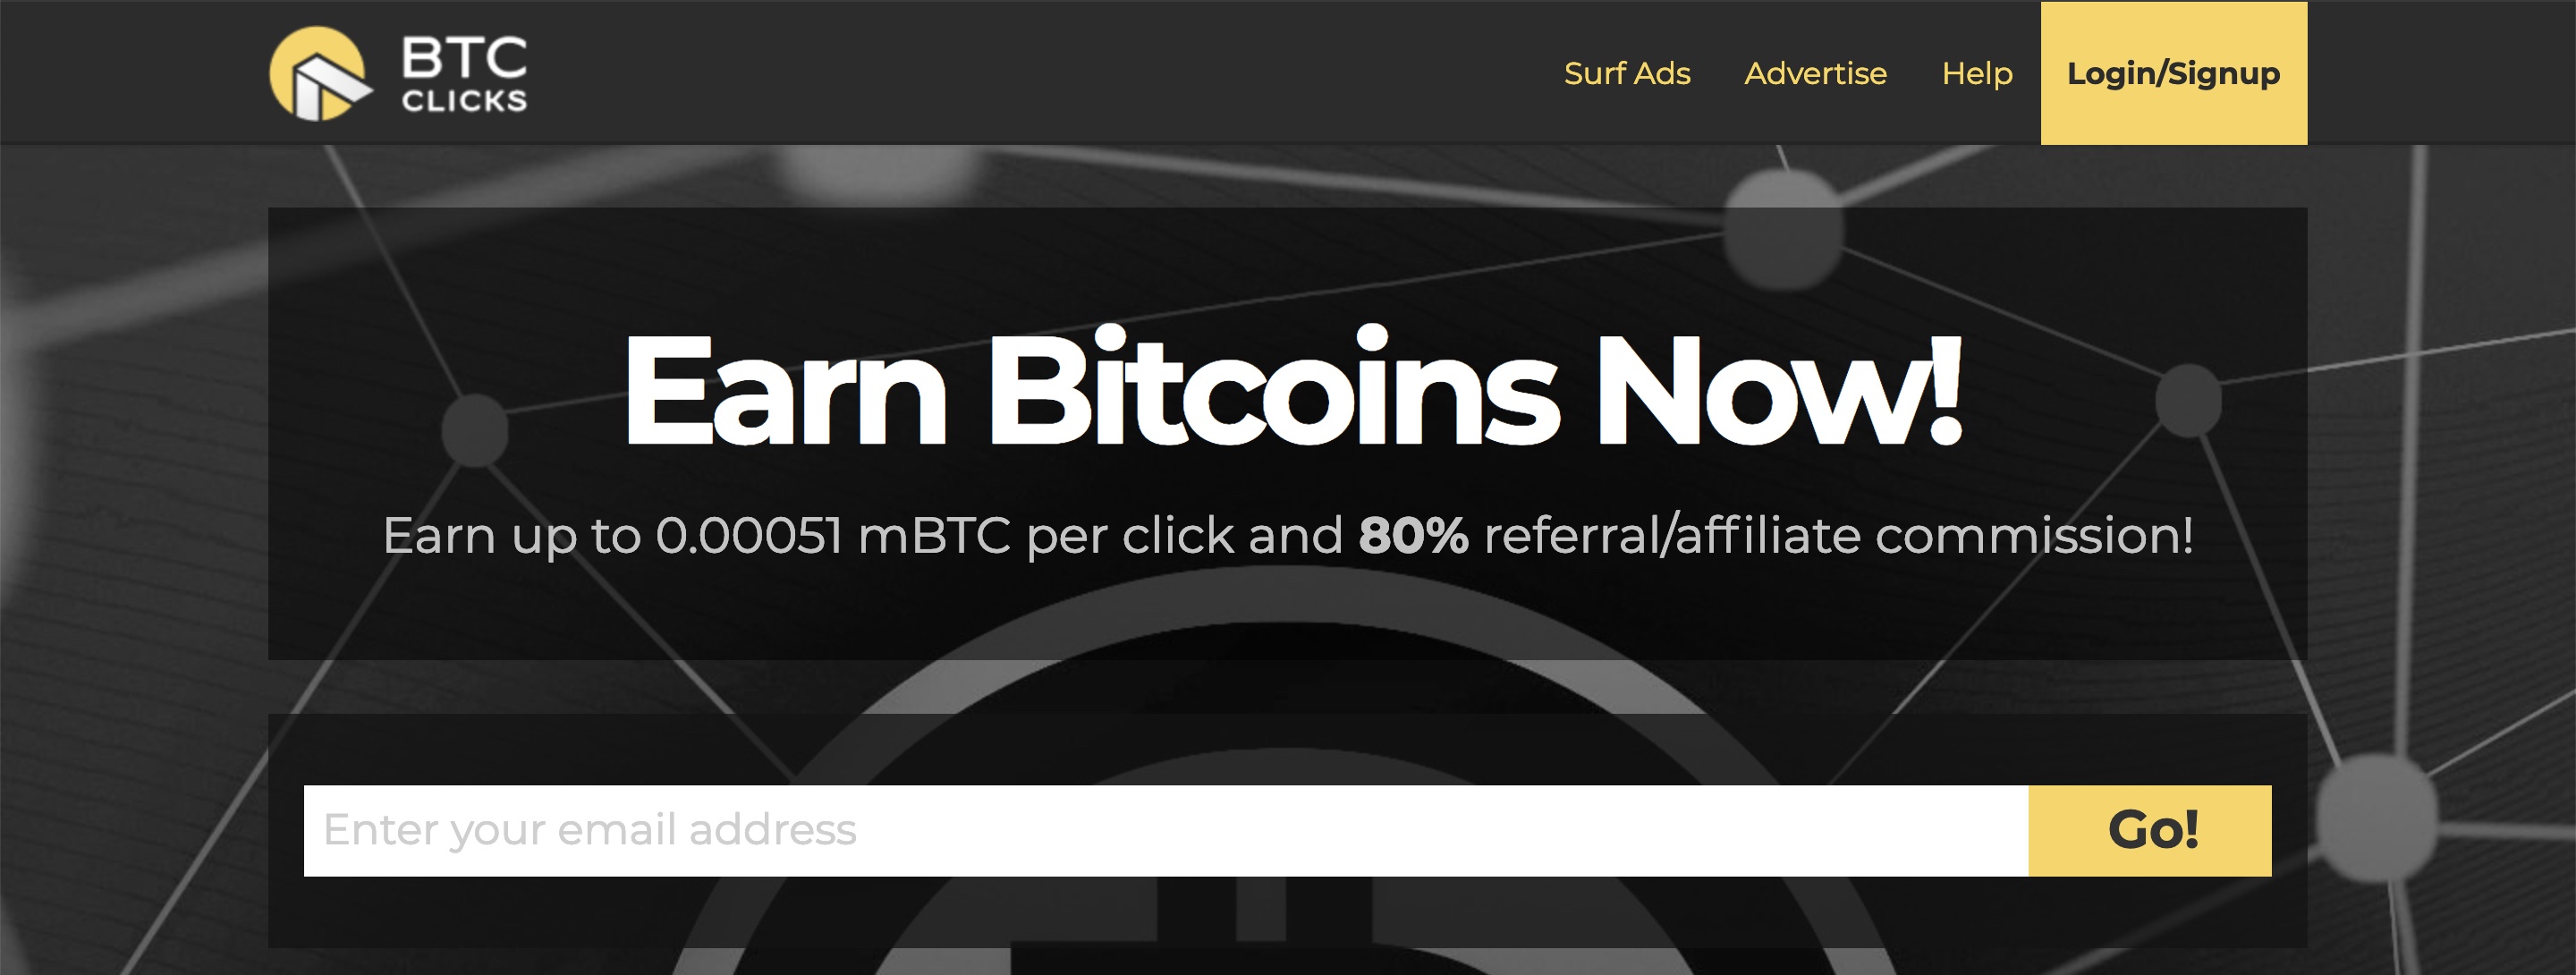 Btc Clicks !   Review Earn Bitcoin By Clicking On Ads - 